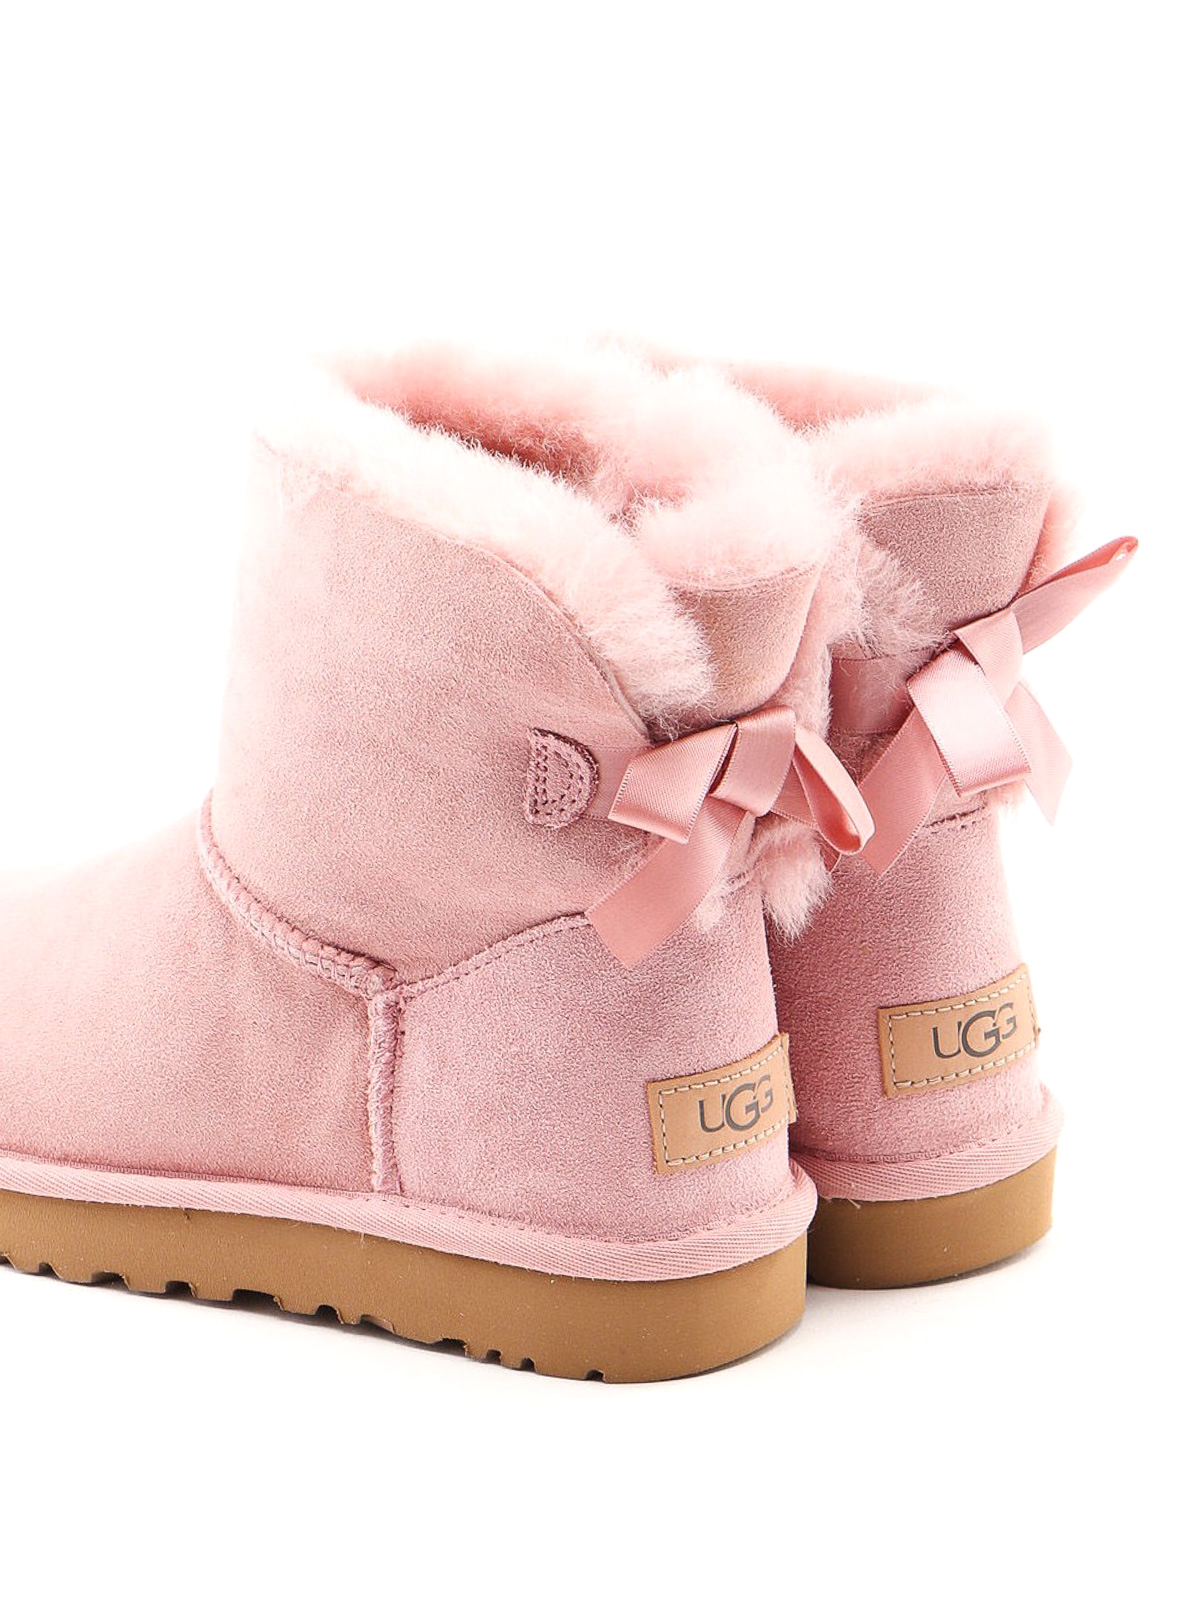 baby pink bailey bow uggs